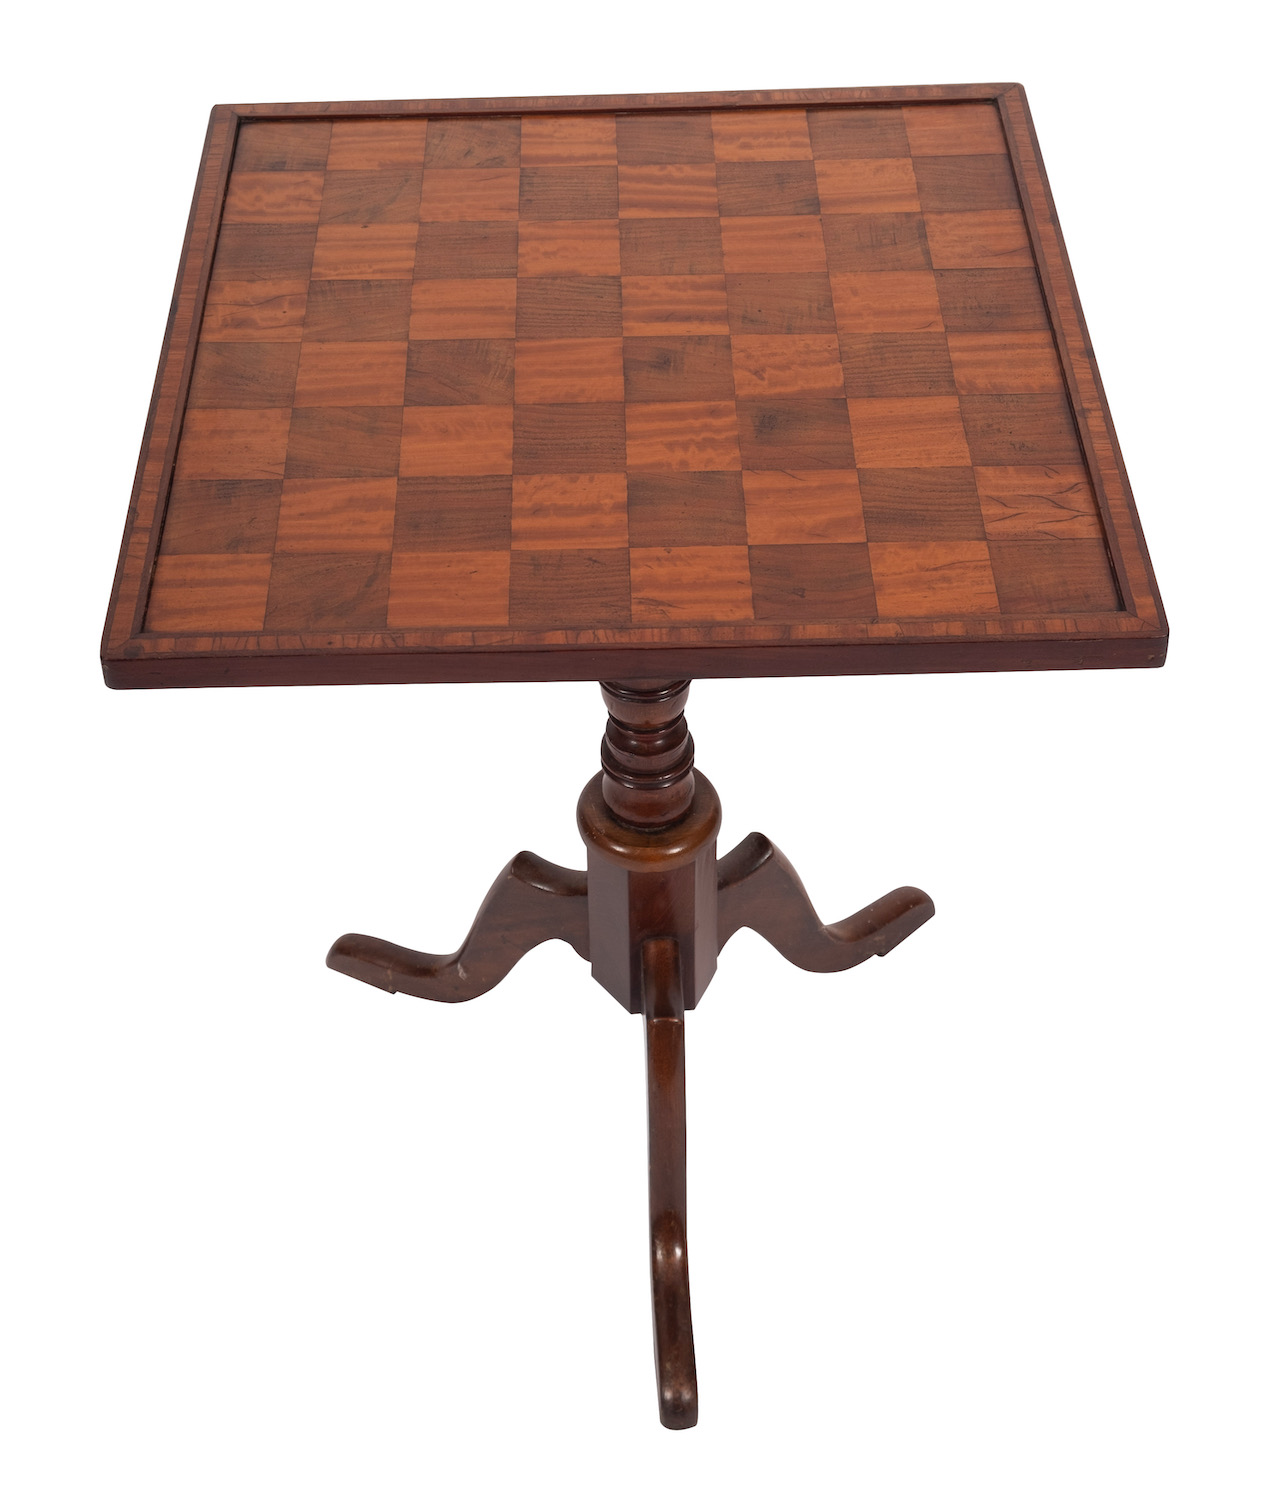 A William IV mahogany and satinwood games table, - Image 2 of 2